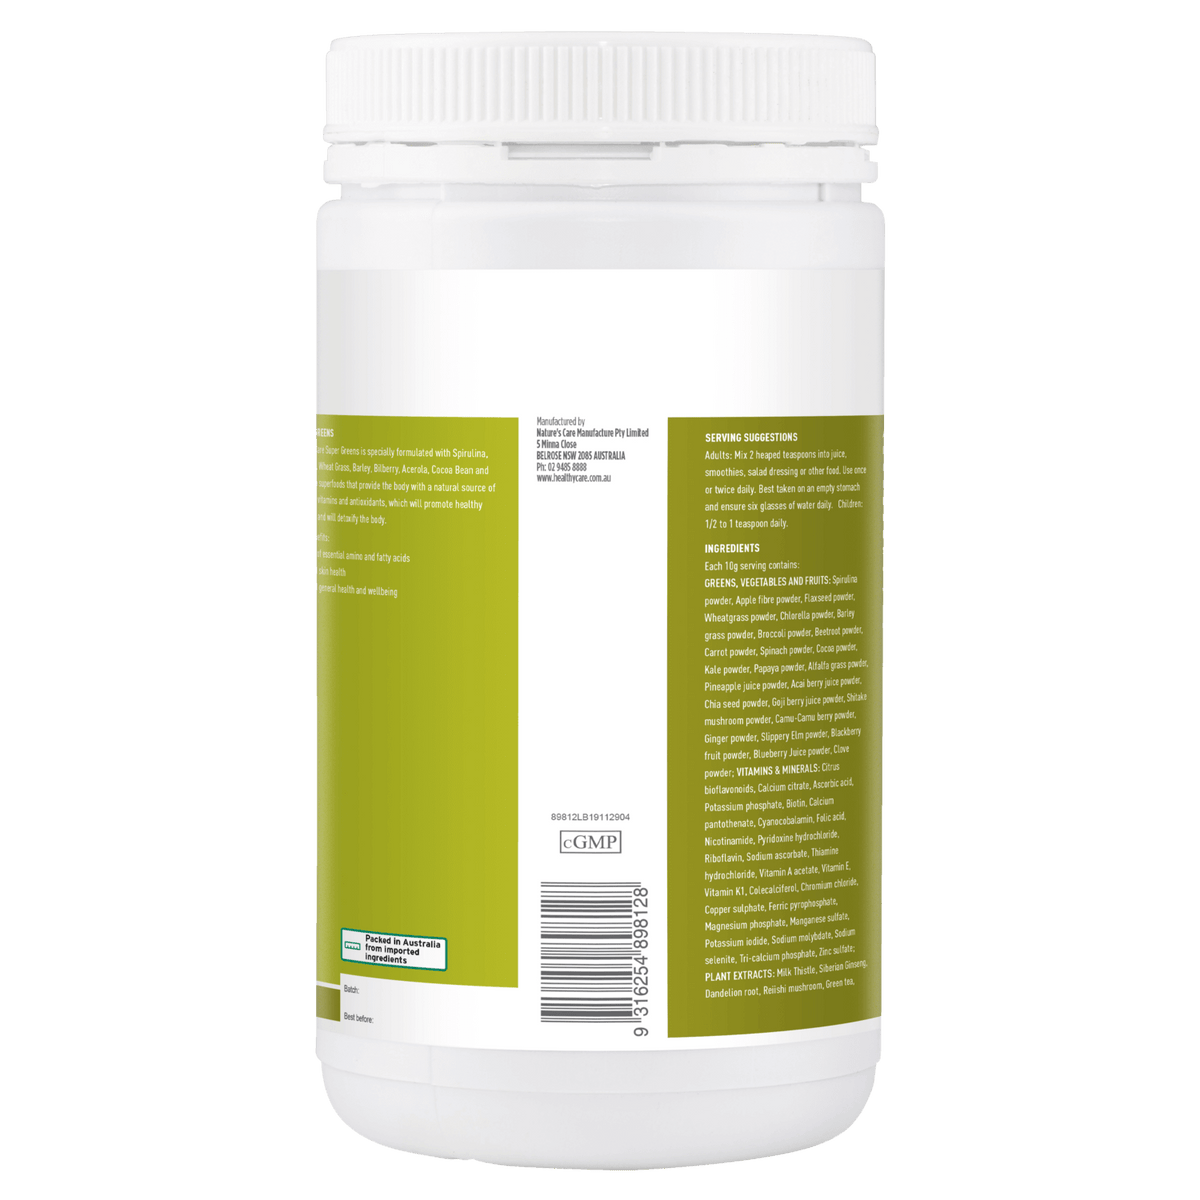 Manufacturer and Barcode of Super Greens 600g Powder-Vitamins & Supplements-Healthy Care Australia